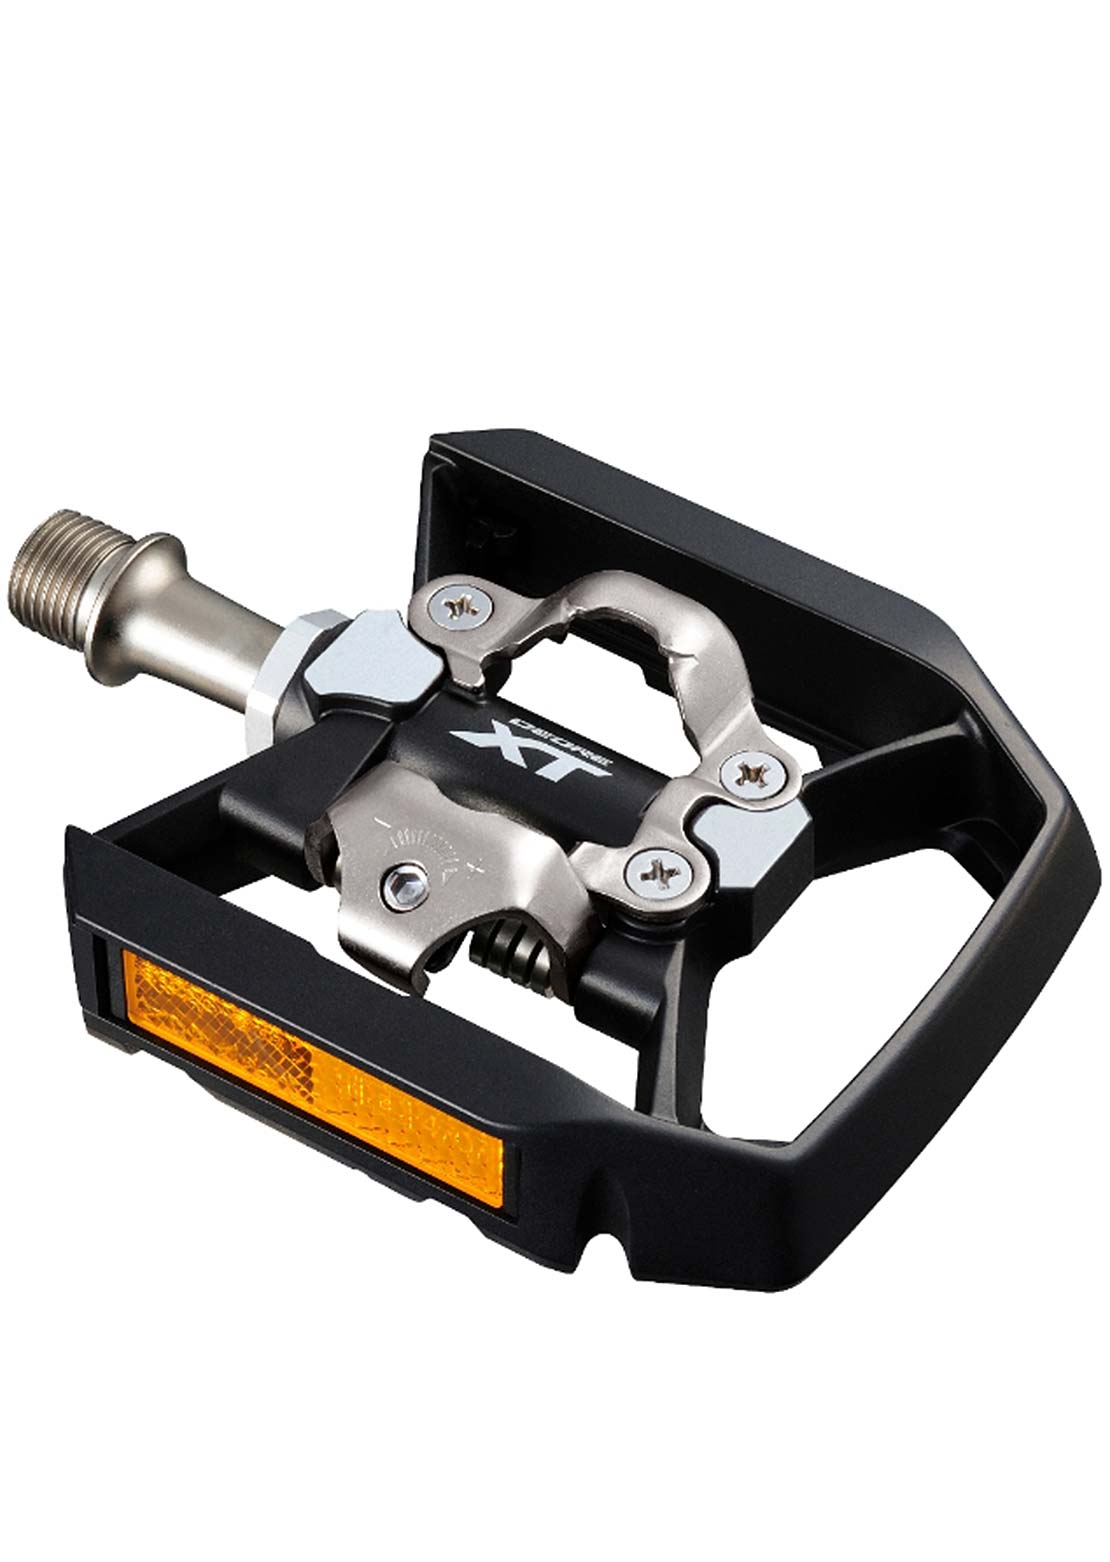 Shimano PD-T8000 Deore XT SPD Pedal With Reflector With Cleat